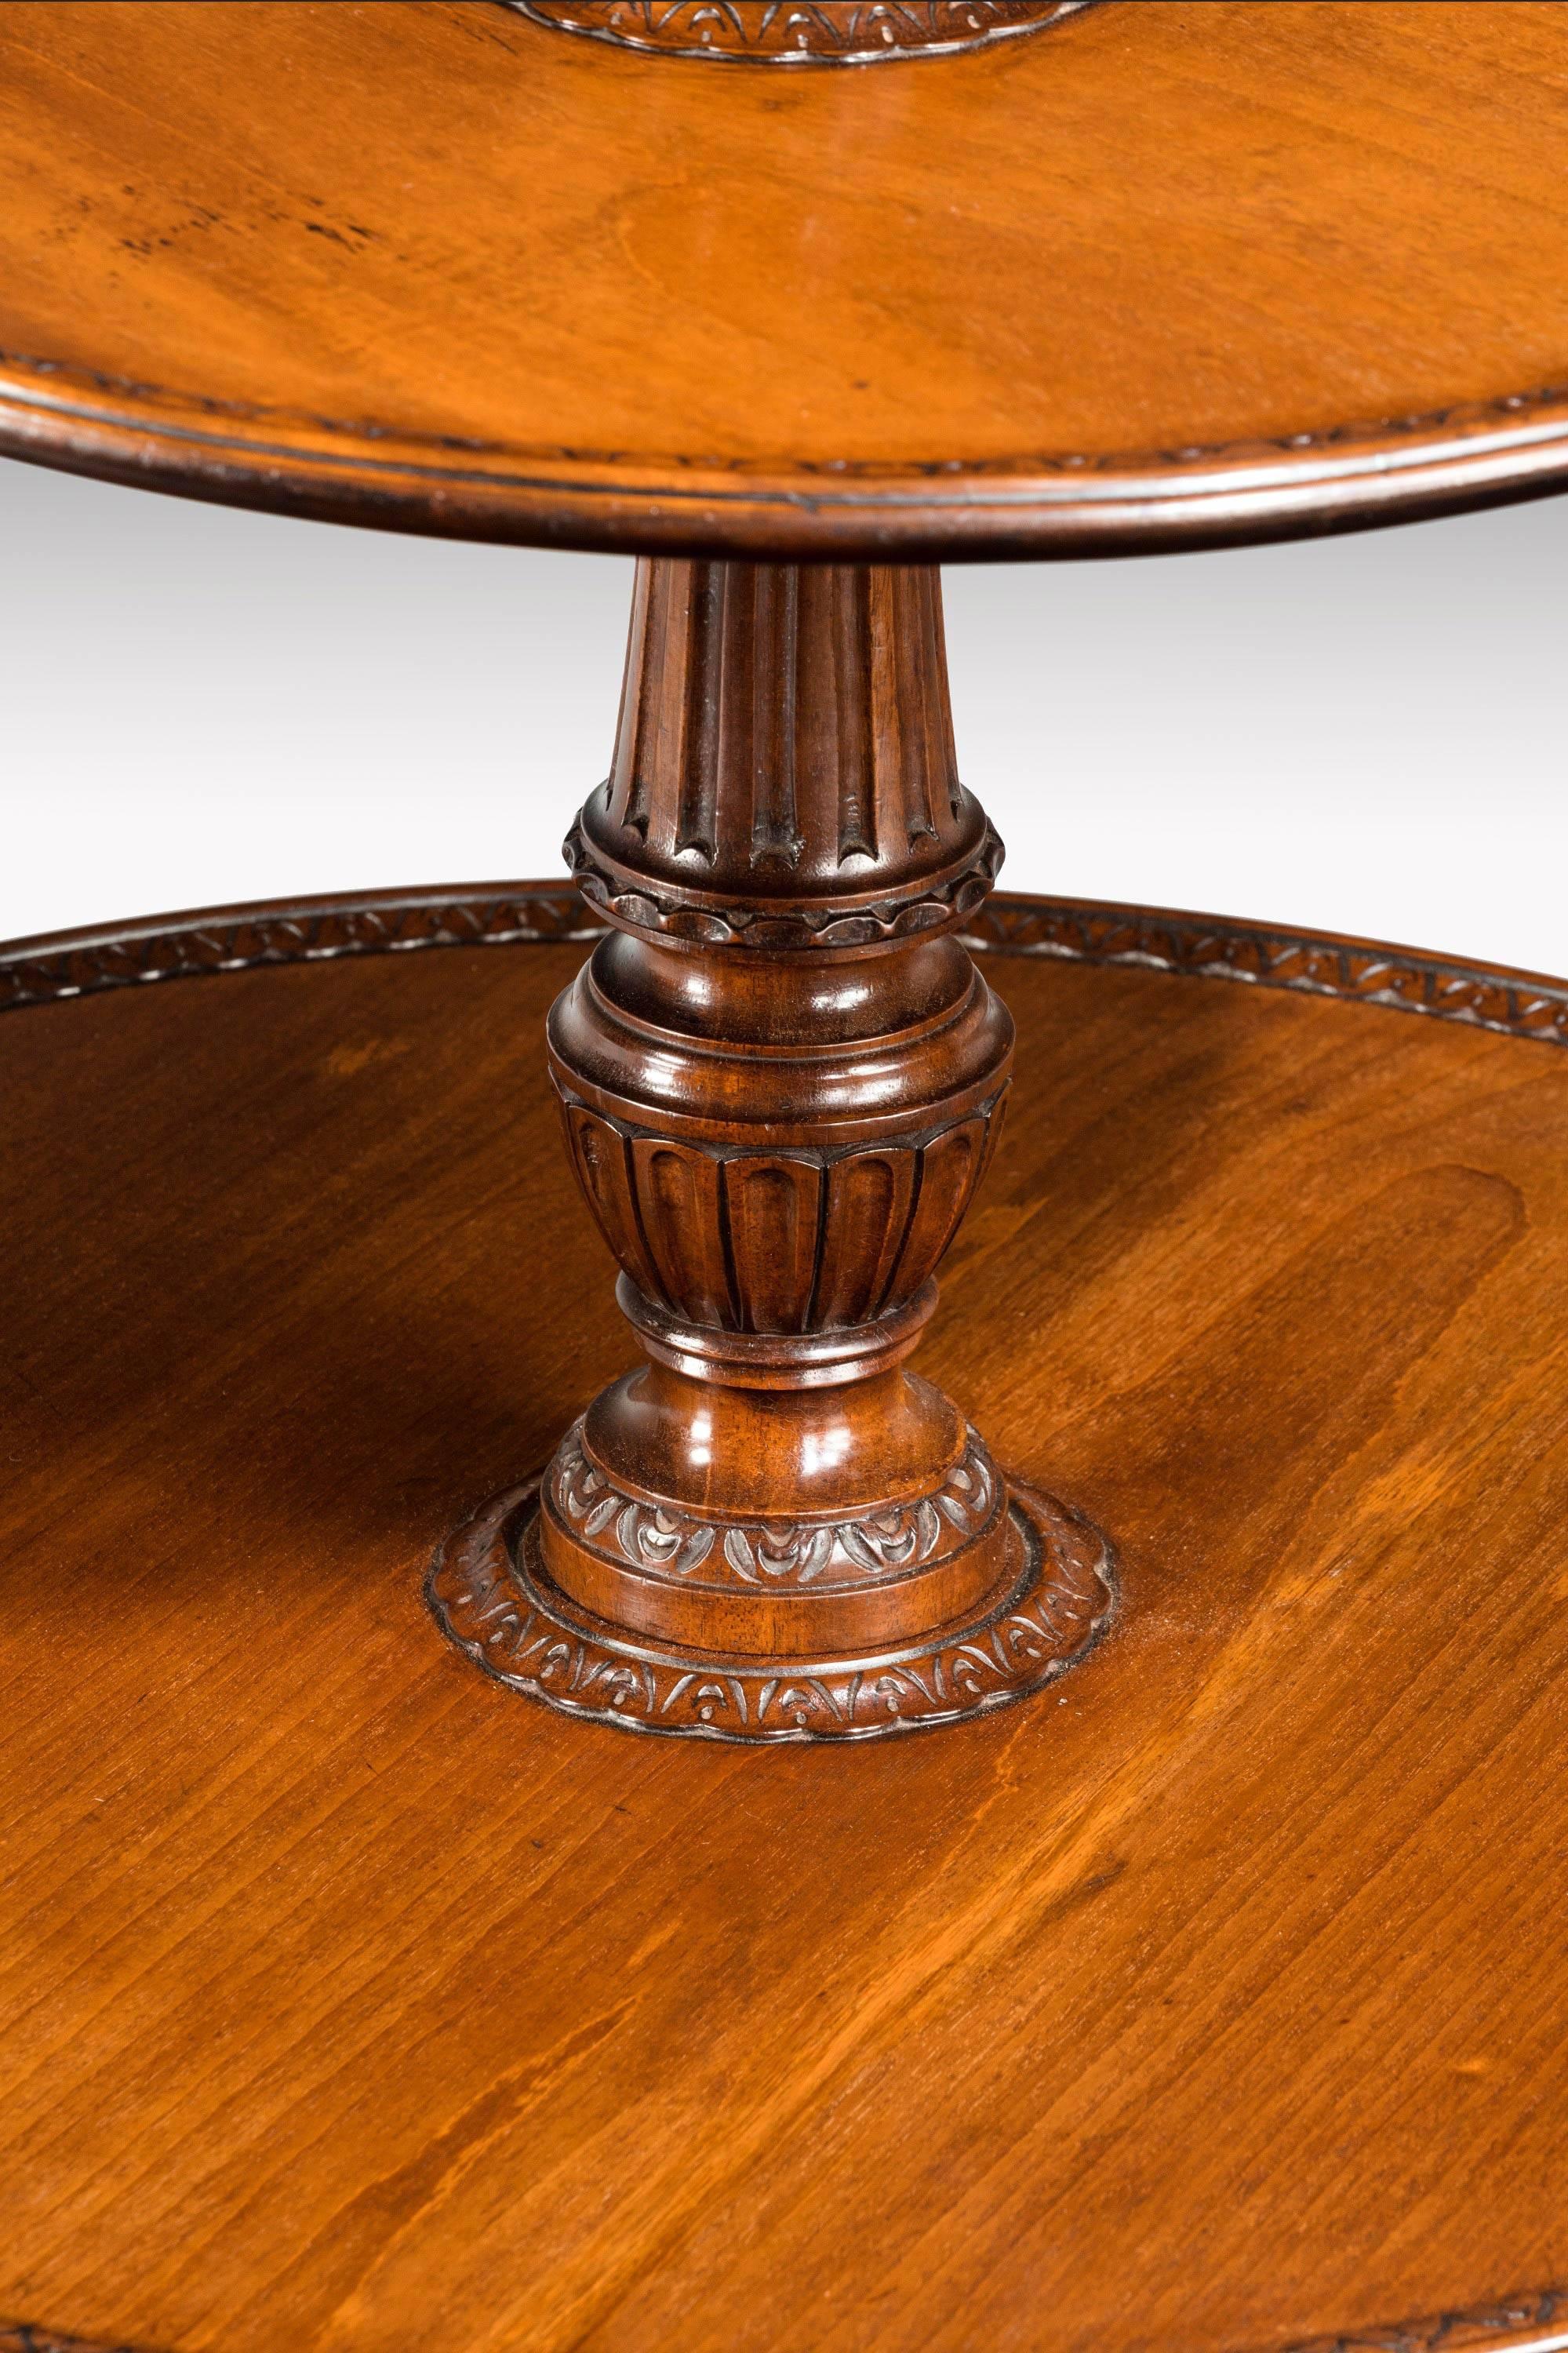 18th Century George III Period Mahogany Three-Tier Dumbwaiter with Carved Detail to the Edges